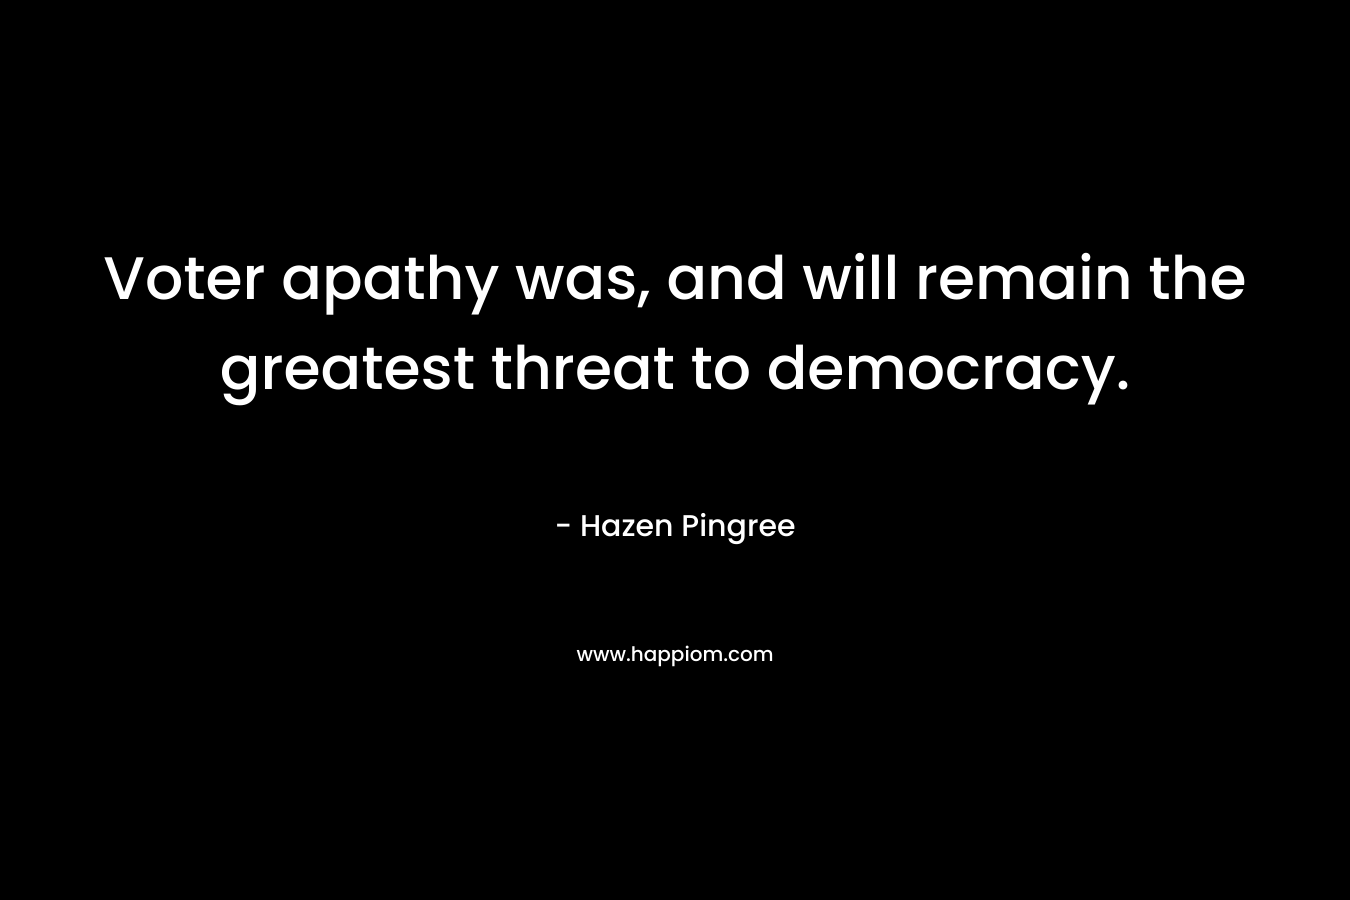 Voter apathy was, and will remain the greatest threat to democracy. – Hazen Pingree